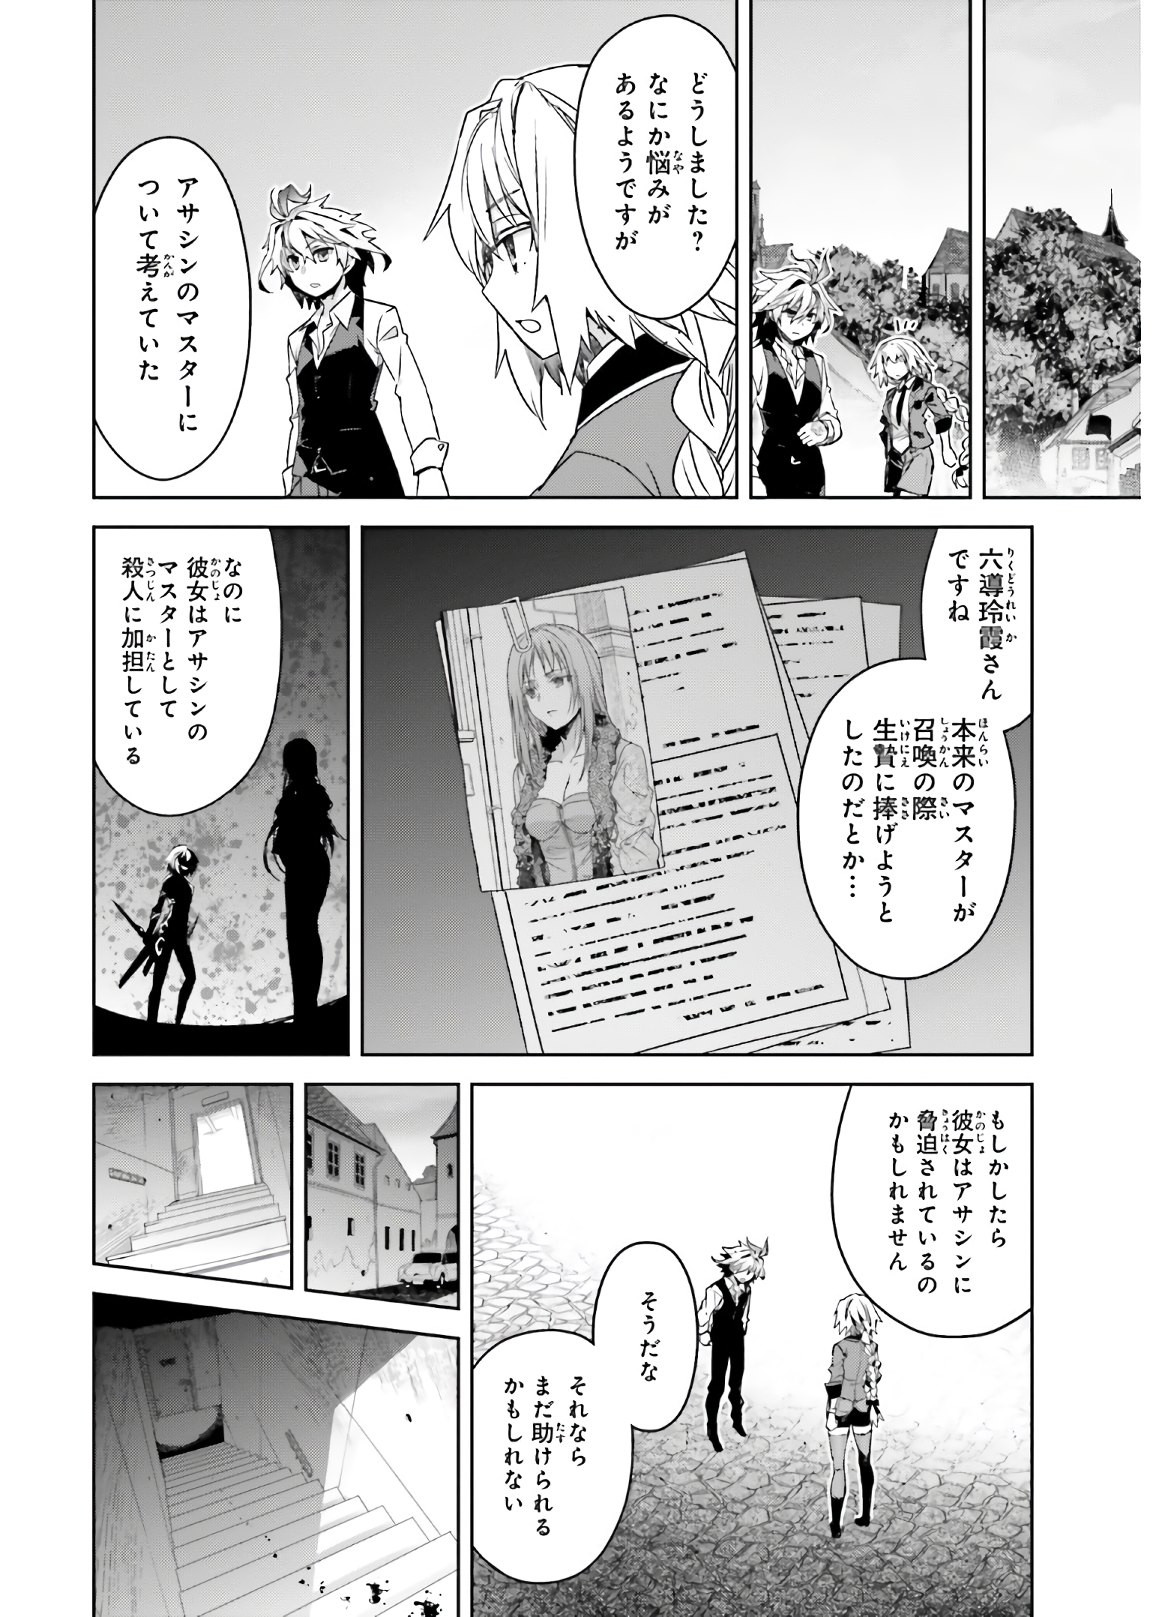 Fate-Apocrypha - Chapter 46 - Page 14